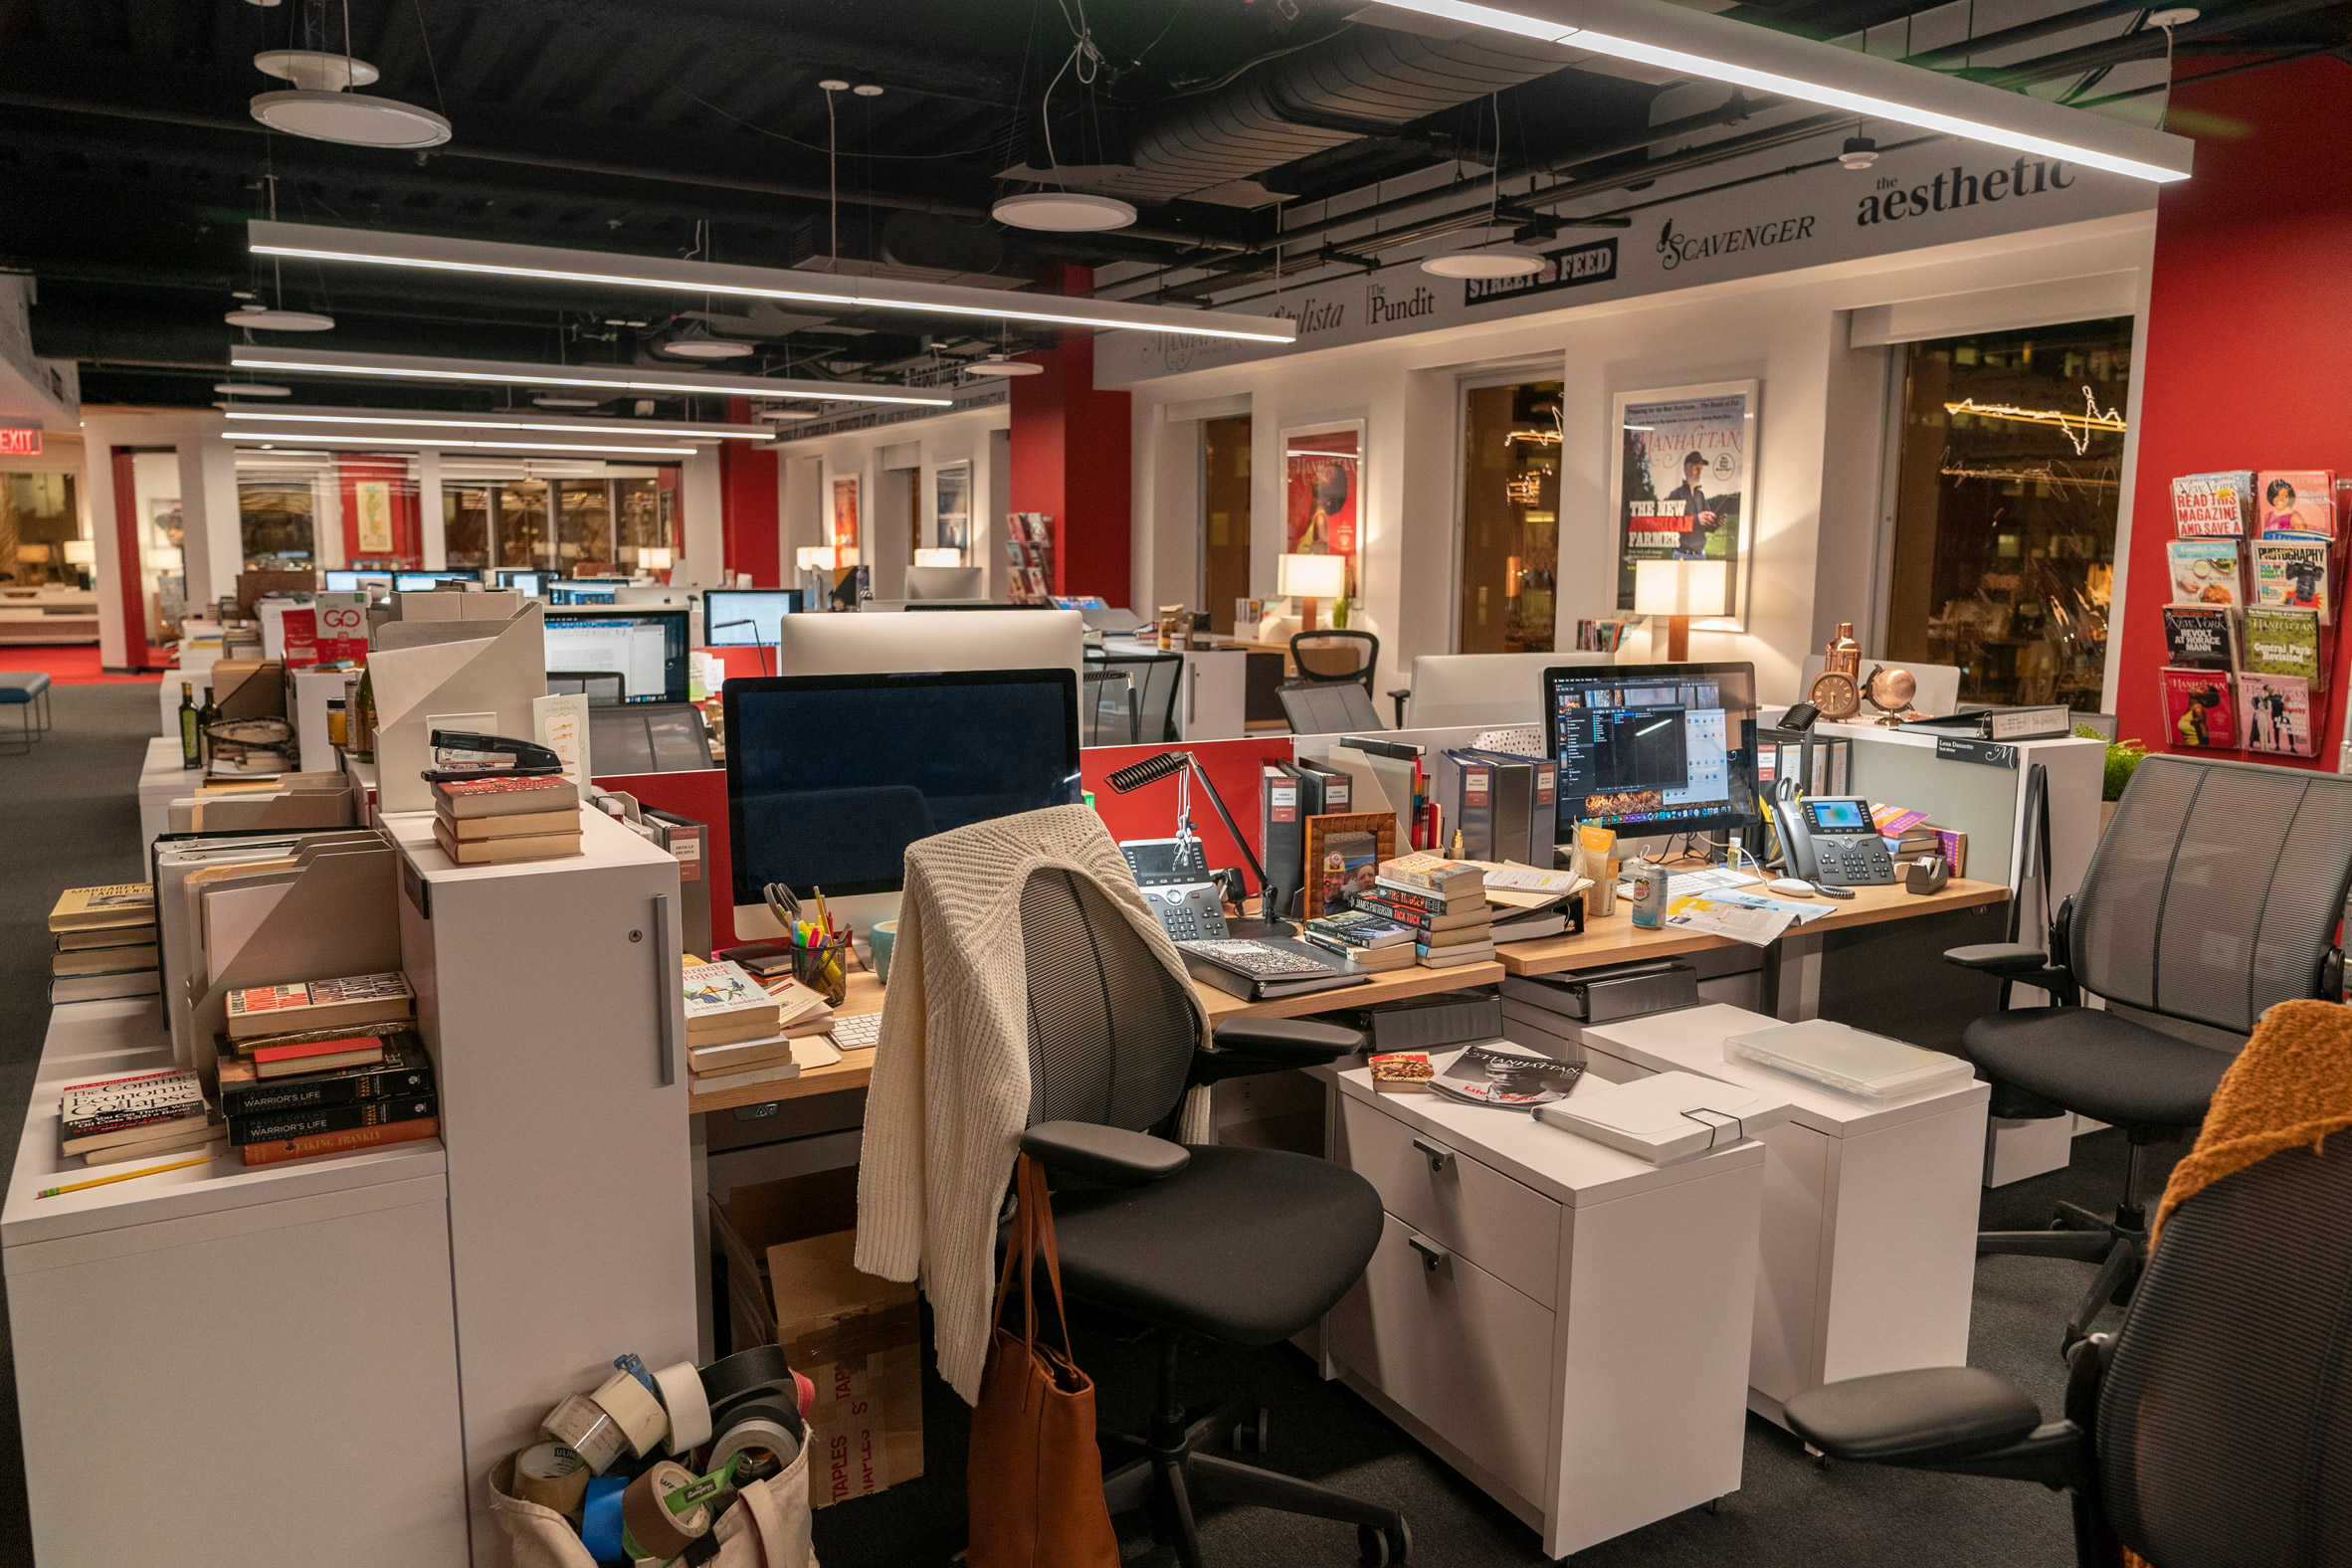 The interiors of a magazine office